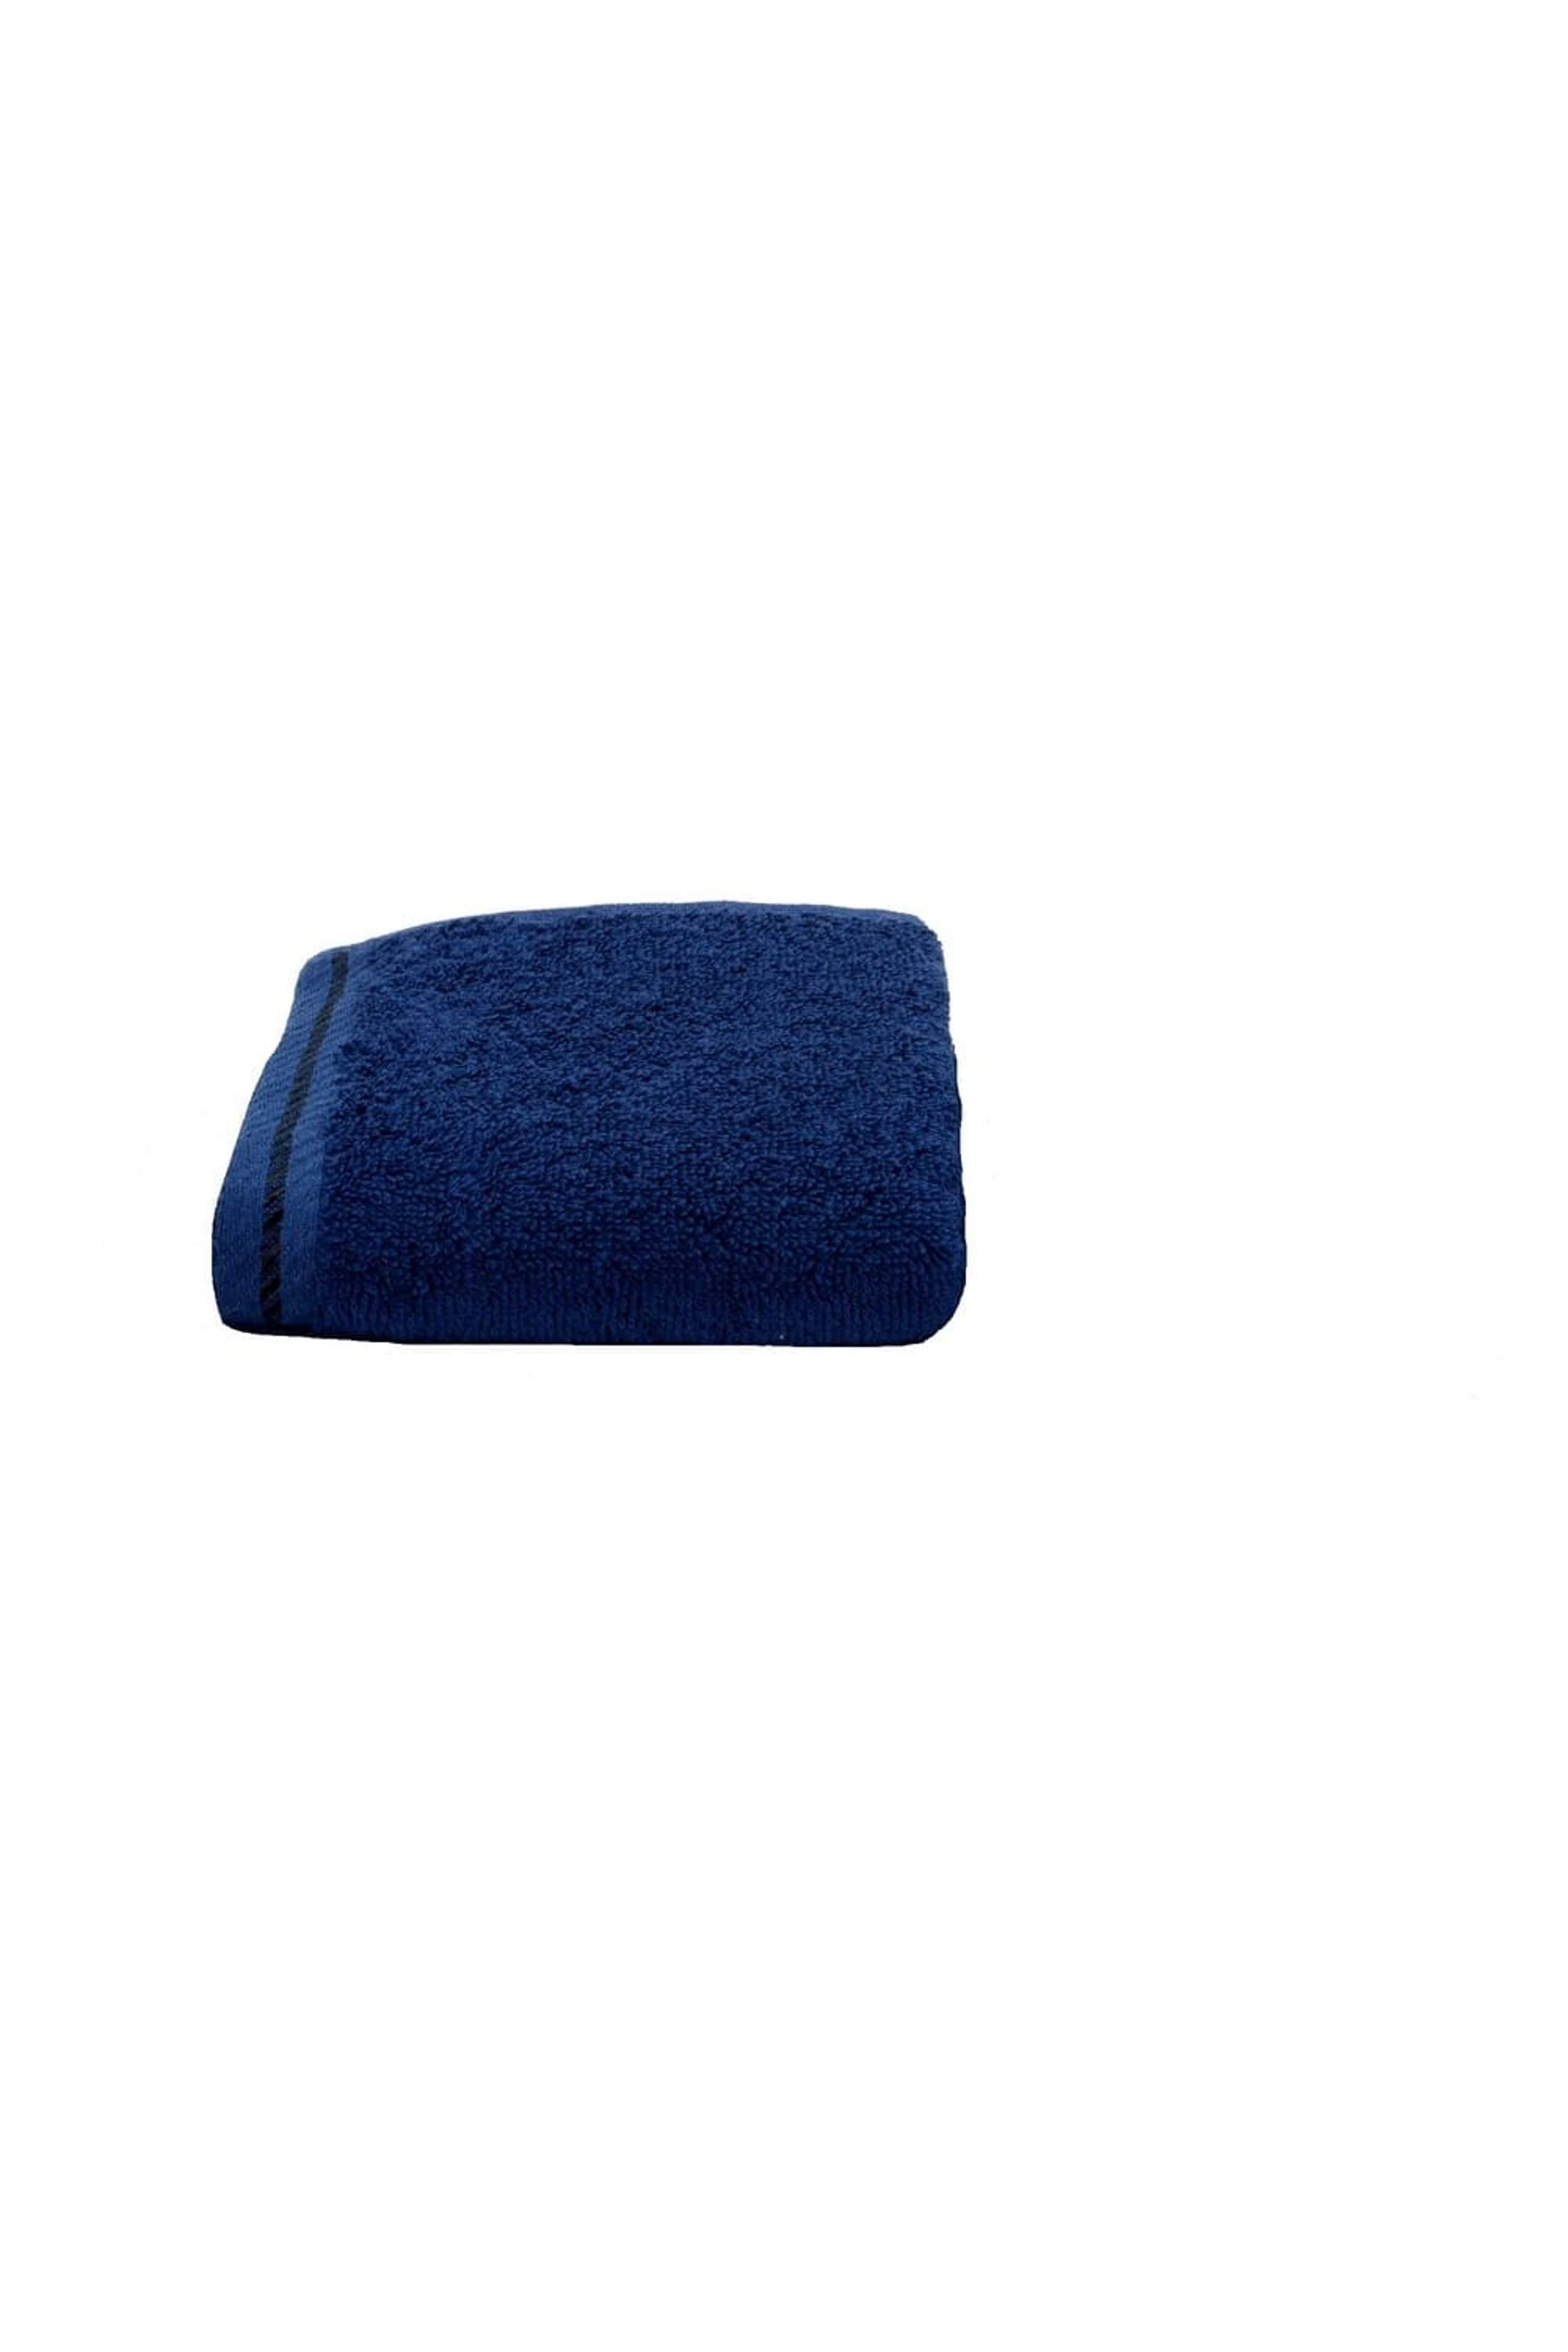 A&R TOWELS A&R TOWELS A&R TOWELS ULTRA SOFT GUEST TOWEL (FRENCH NAVY) (ONE SIZE)